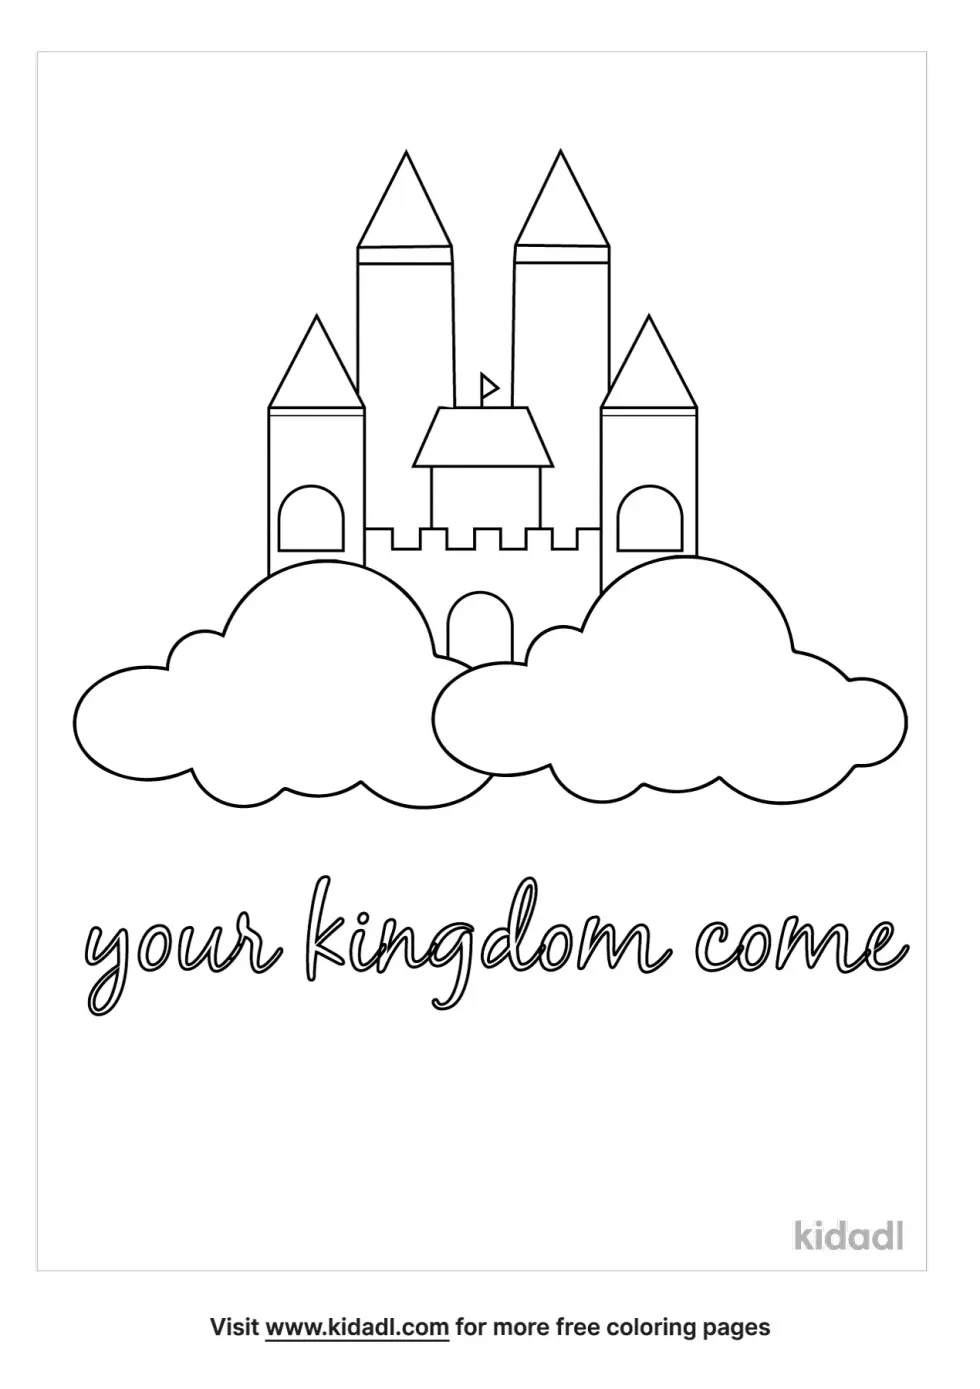 Your Kingdom Come Coloring Page